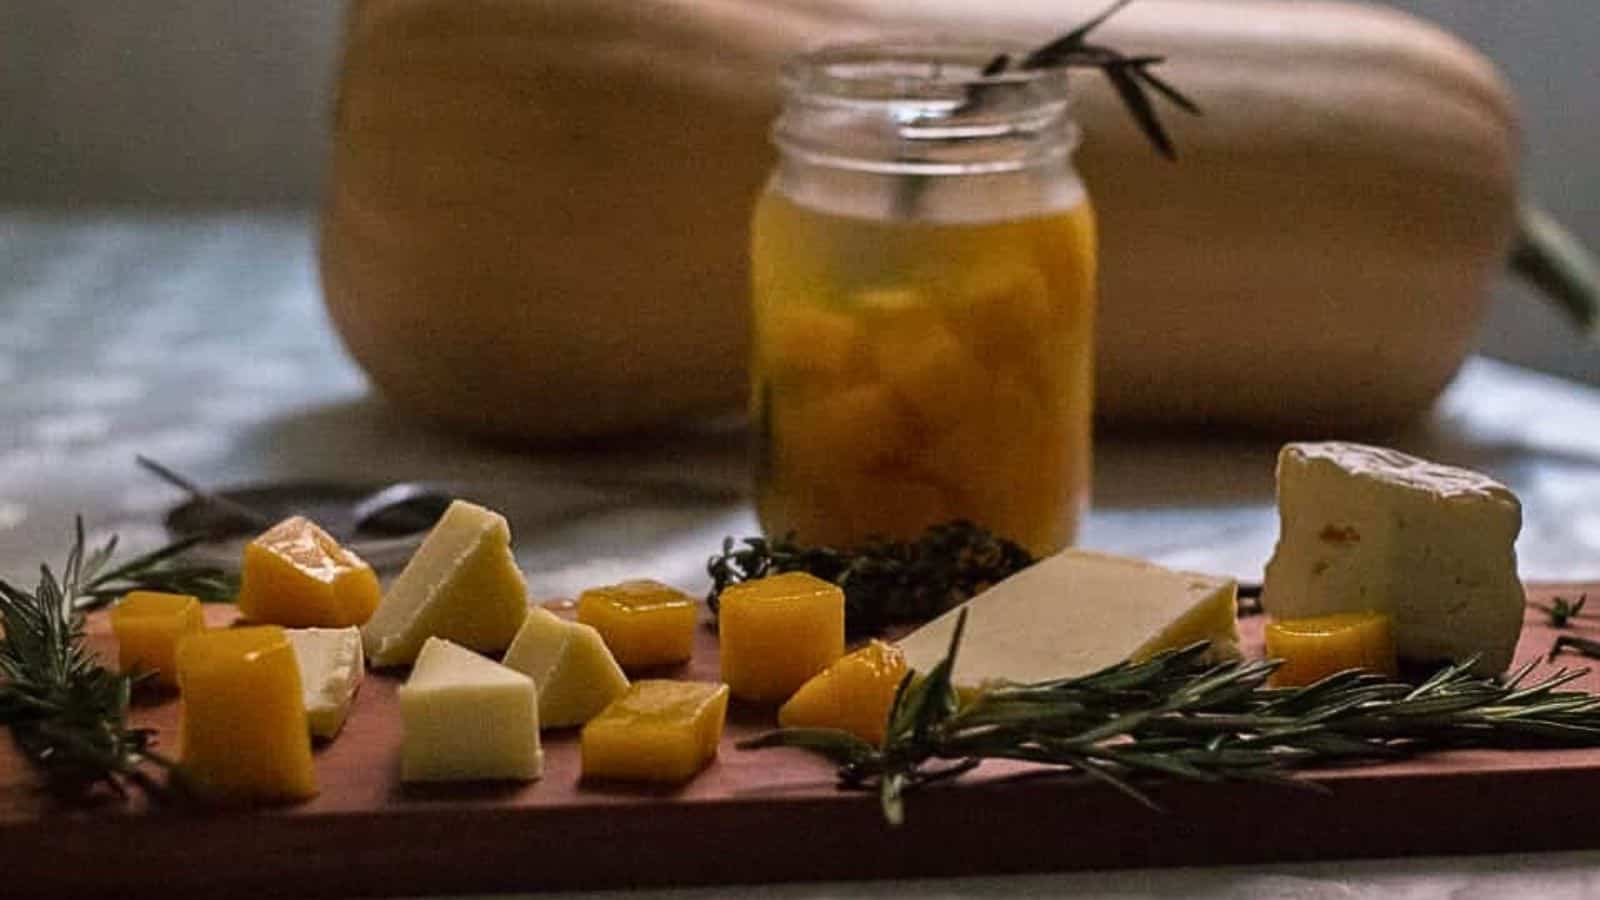 A wooden cutting board with cheese, herbs and a pumpkin.